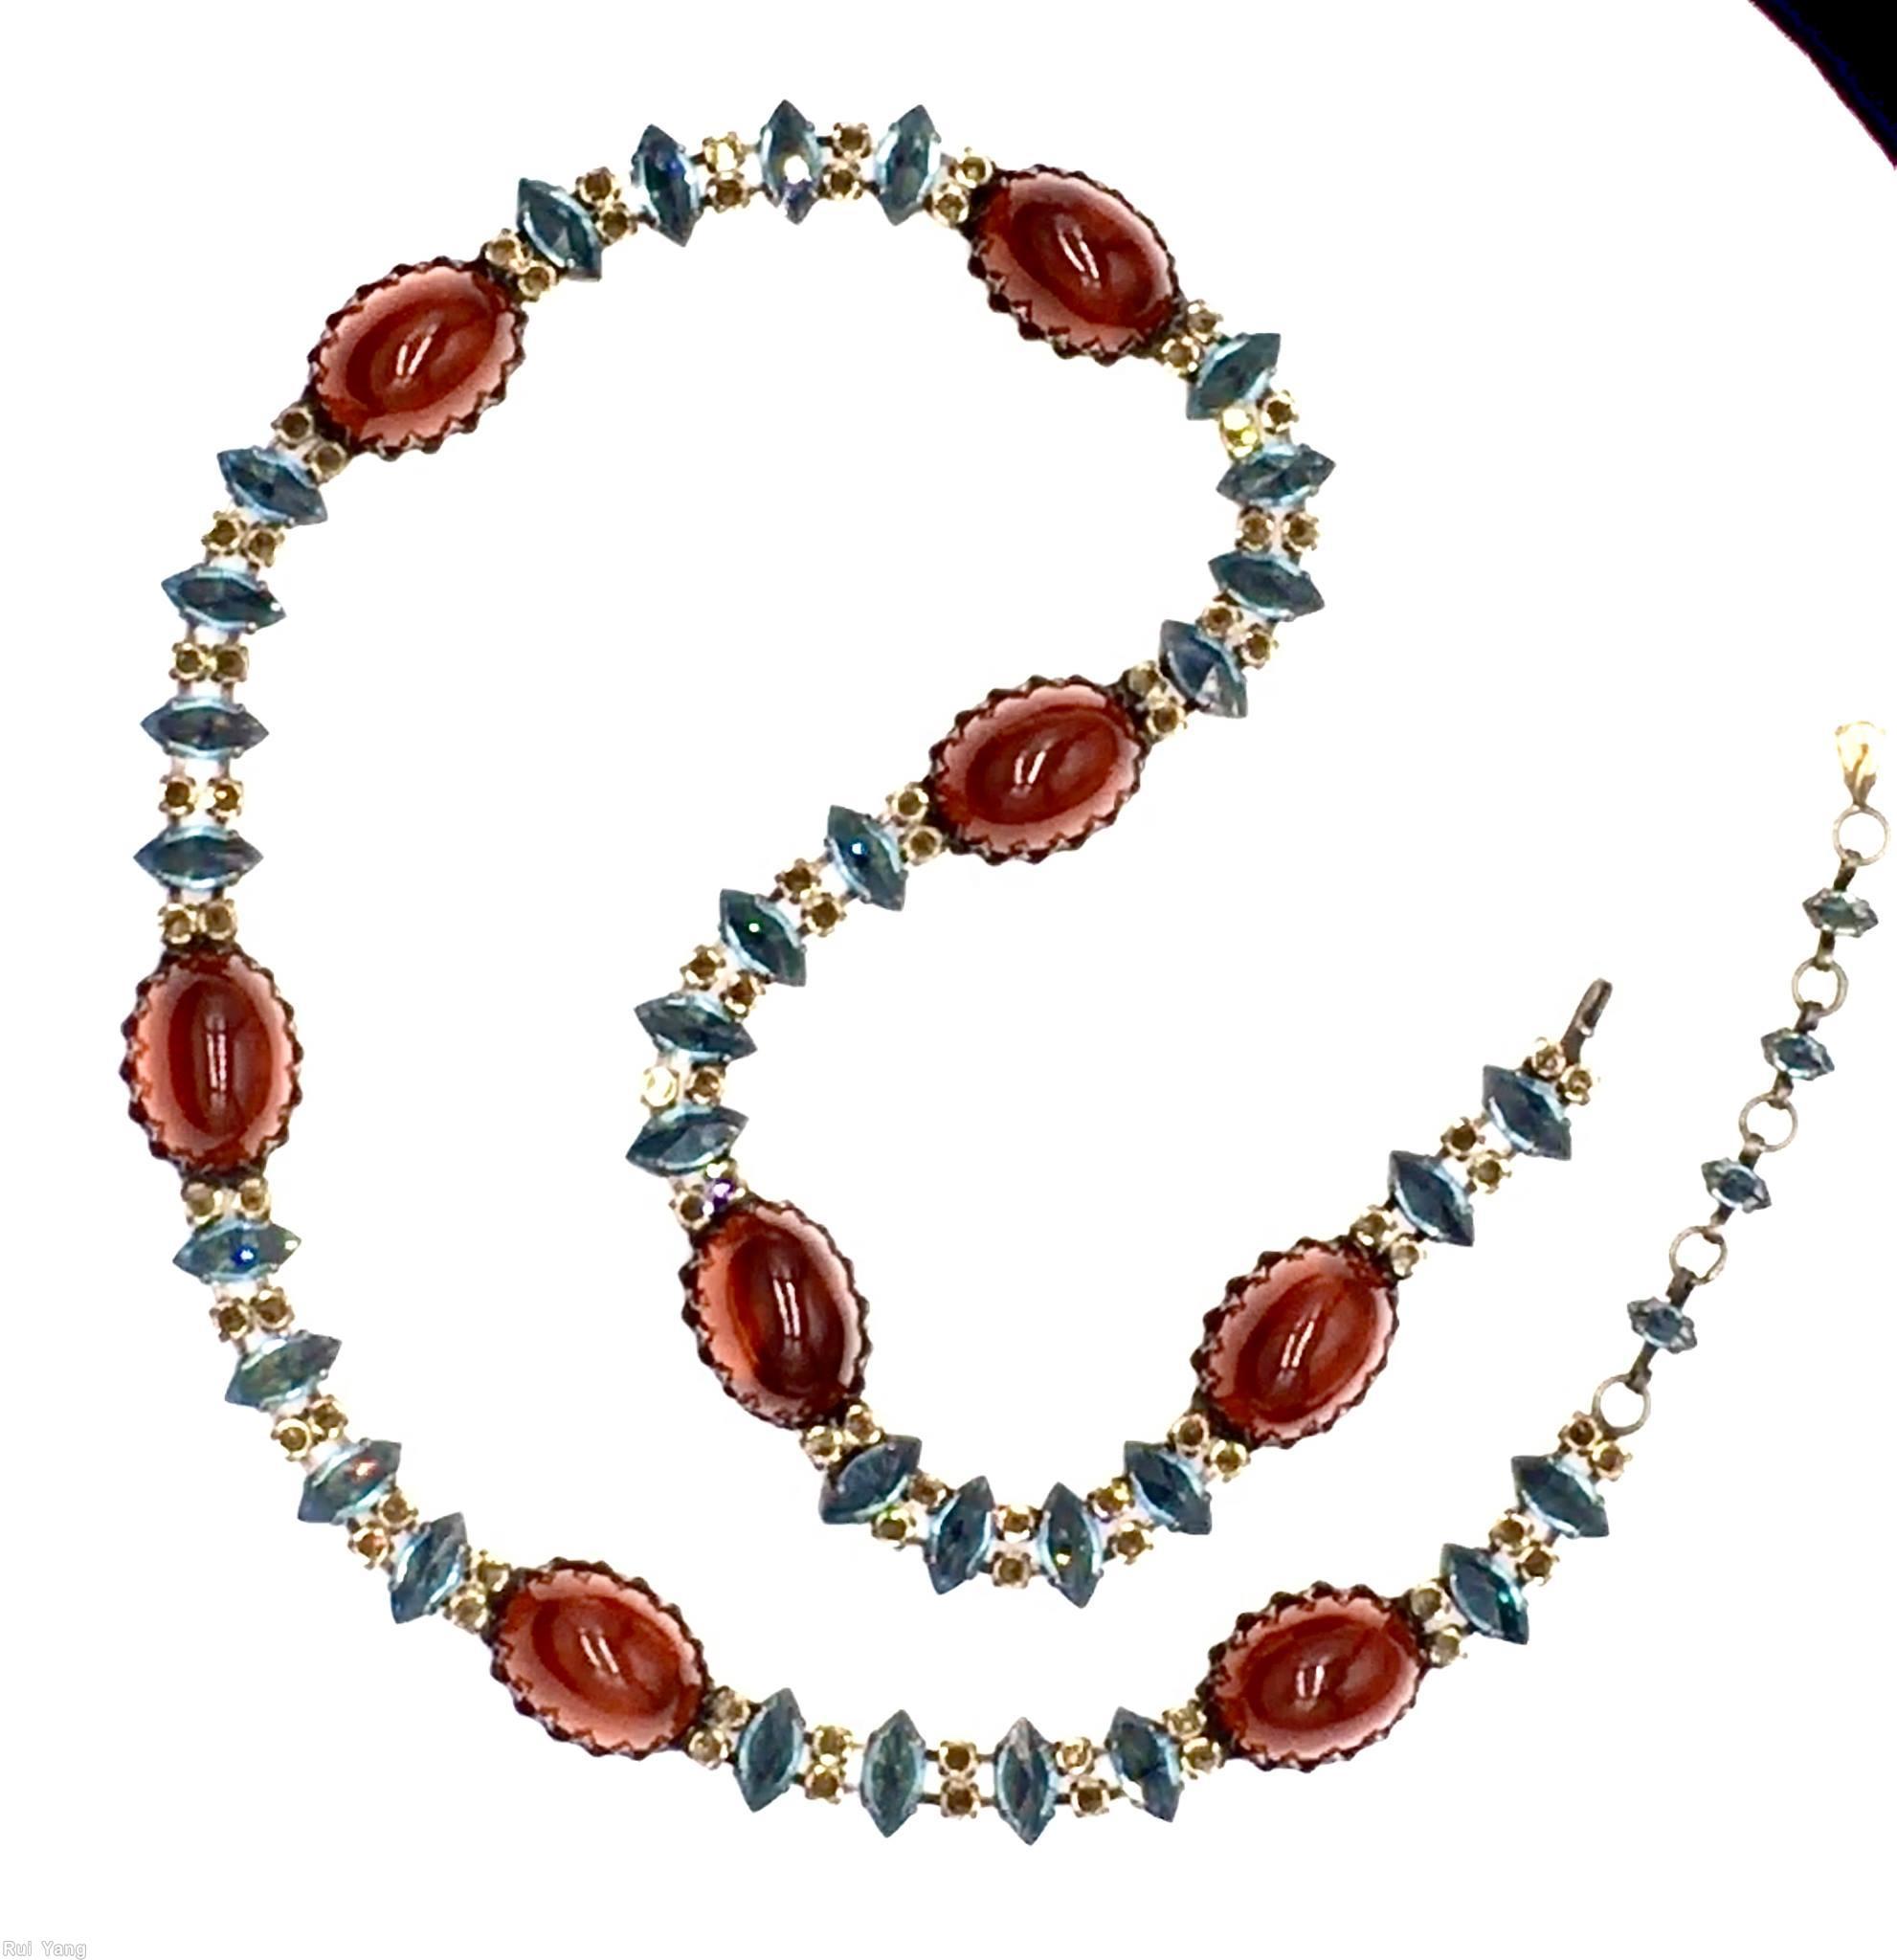 Schreiner 8 large oval cab connected by 4 navette 10 small chaton smoky blue brown jewelry